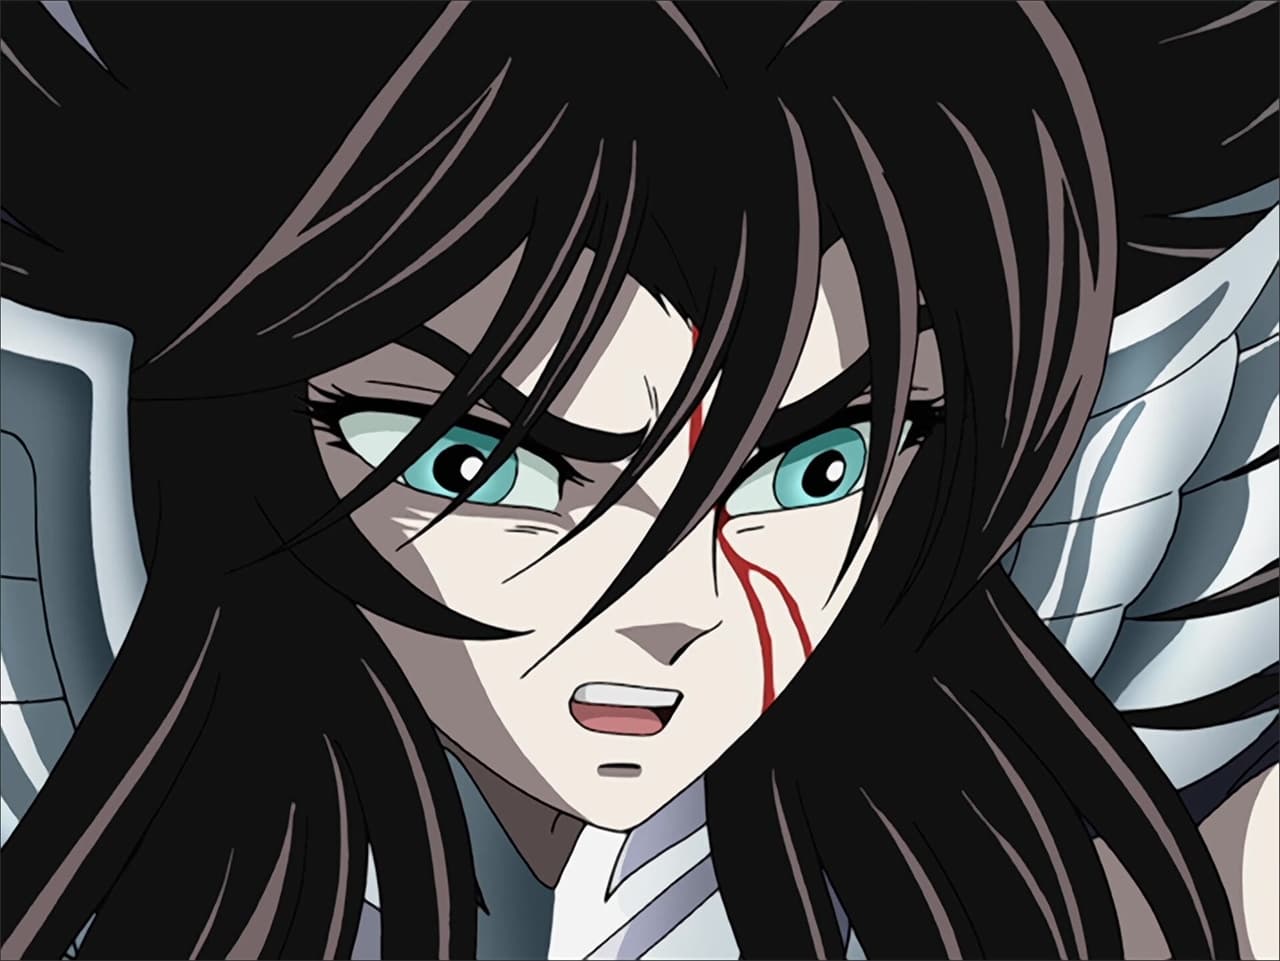 Saint Seiya: The Hades Chapter - Season 4 Episode 6 : To a World Overflowing with Light